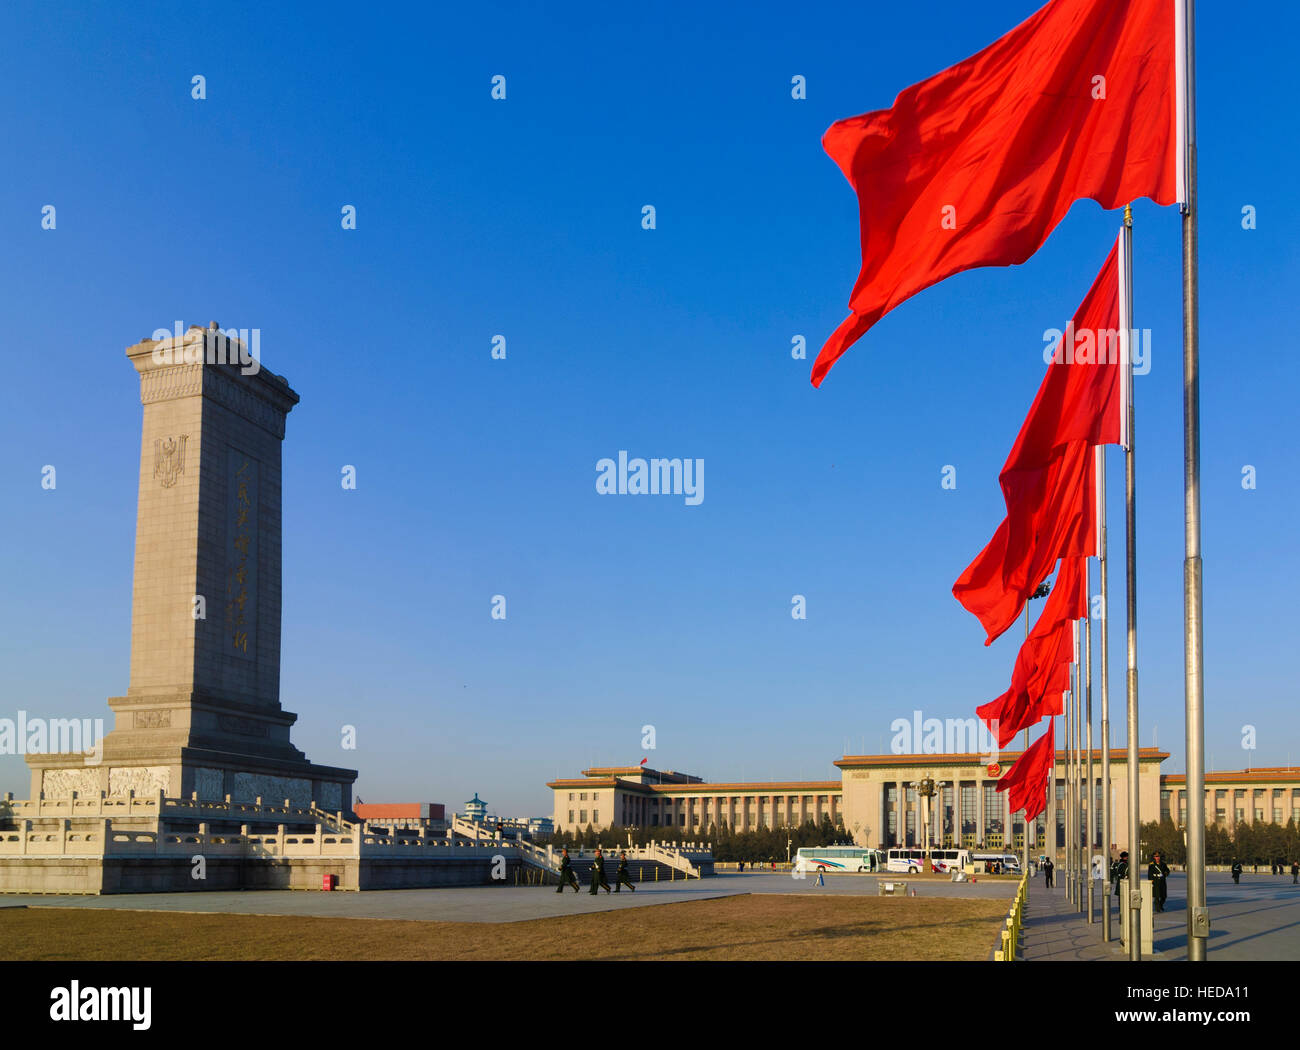 Peking: Tiananmen Square (Tiananmen Square); Great hall of the people and monument to the national heroes, red flags, Beijing, China Stock Photo